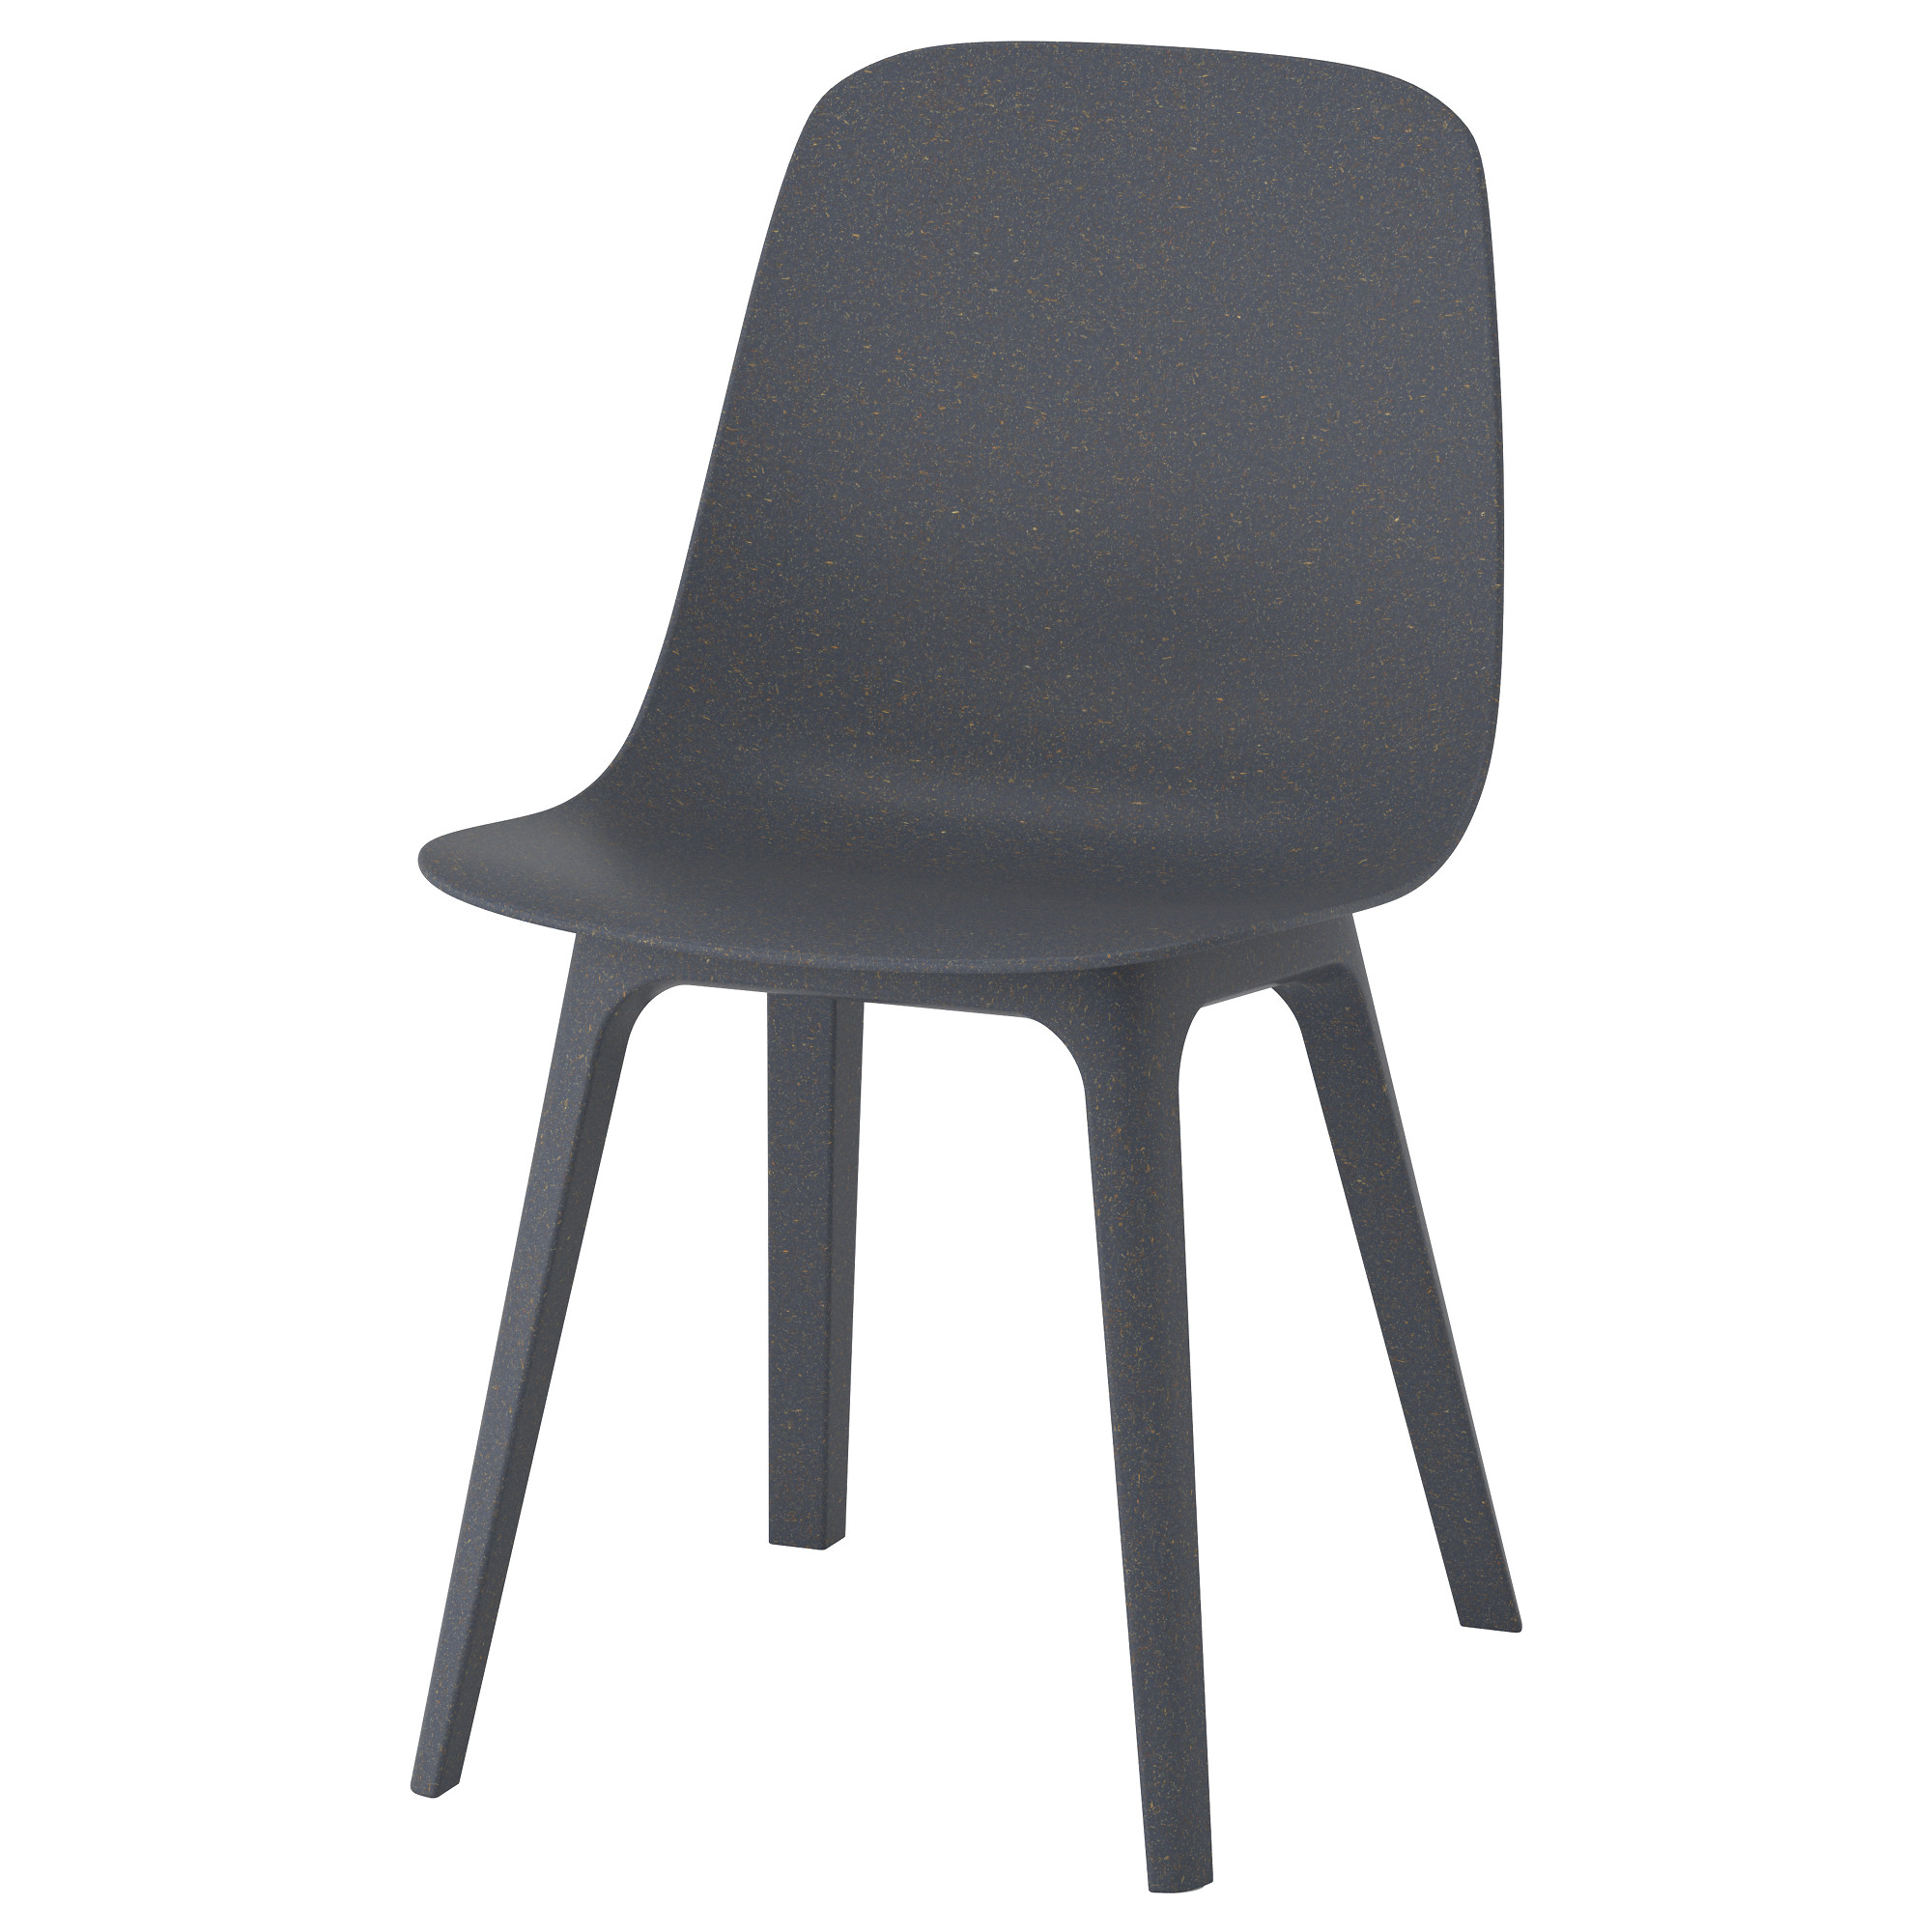 20360001 Odger Dining Chairs IKEA khmer in phnom penh cambodia